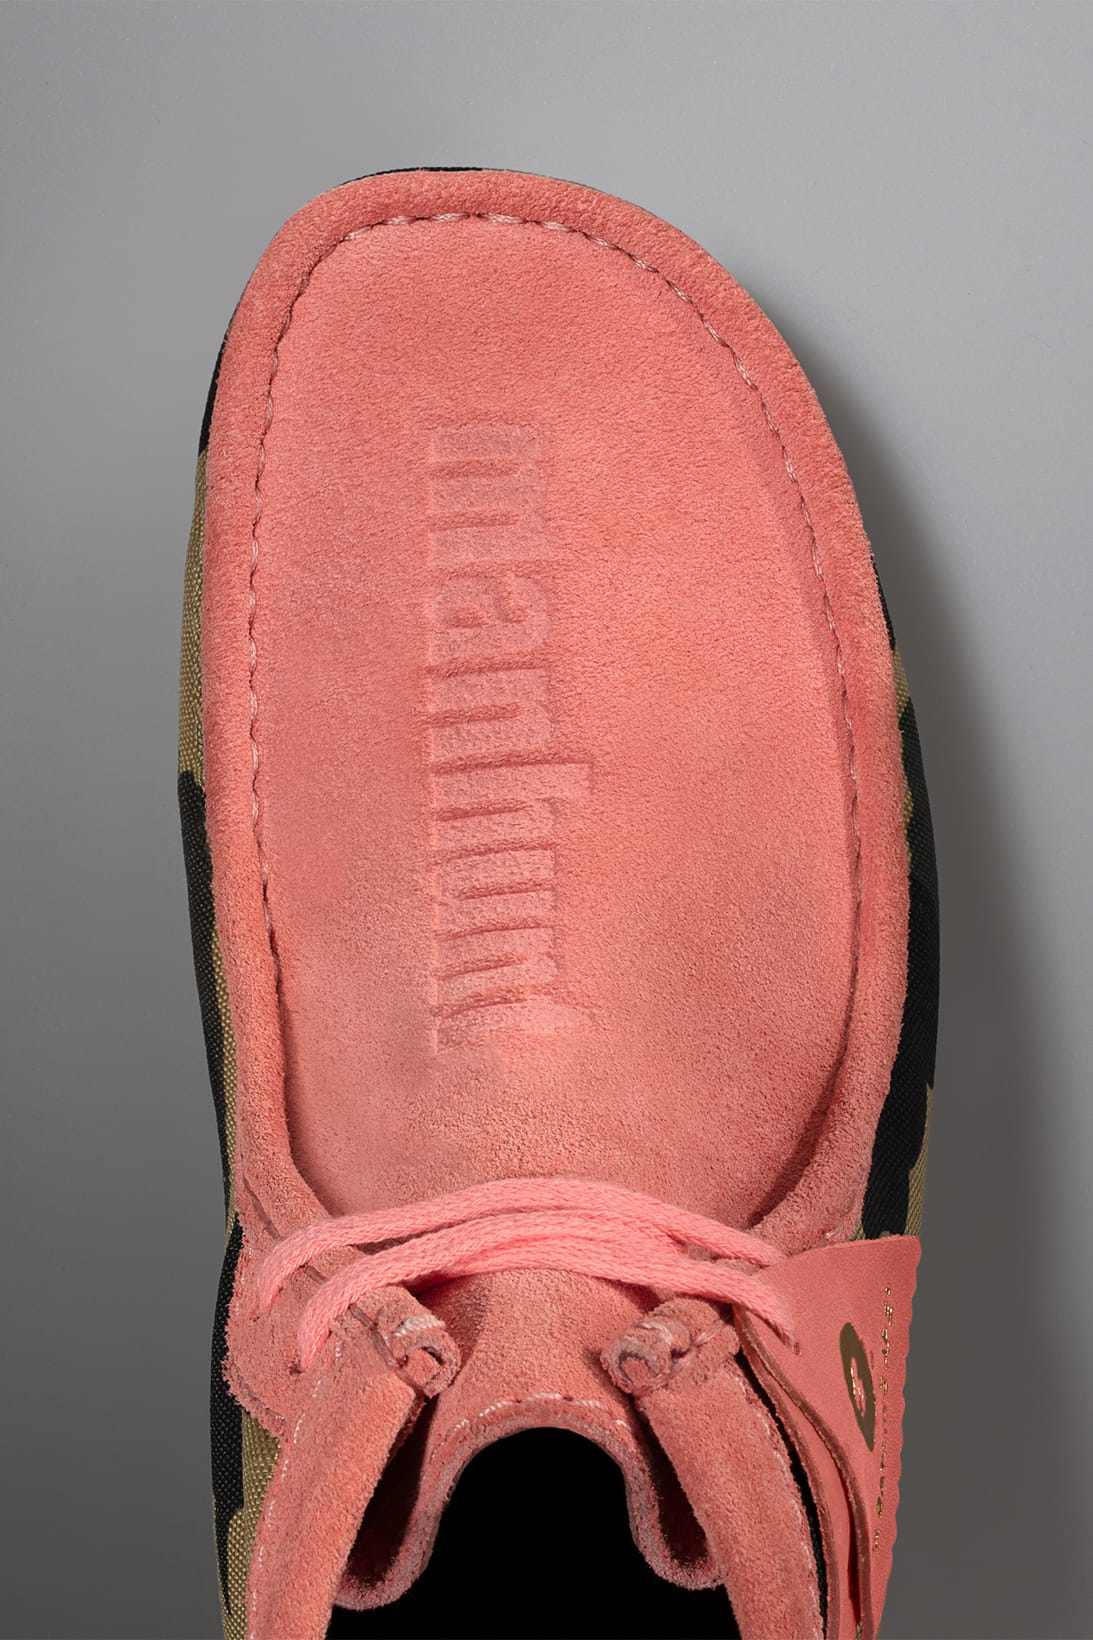 clarks pink boots